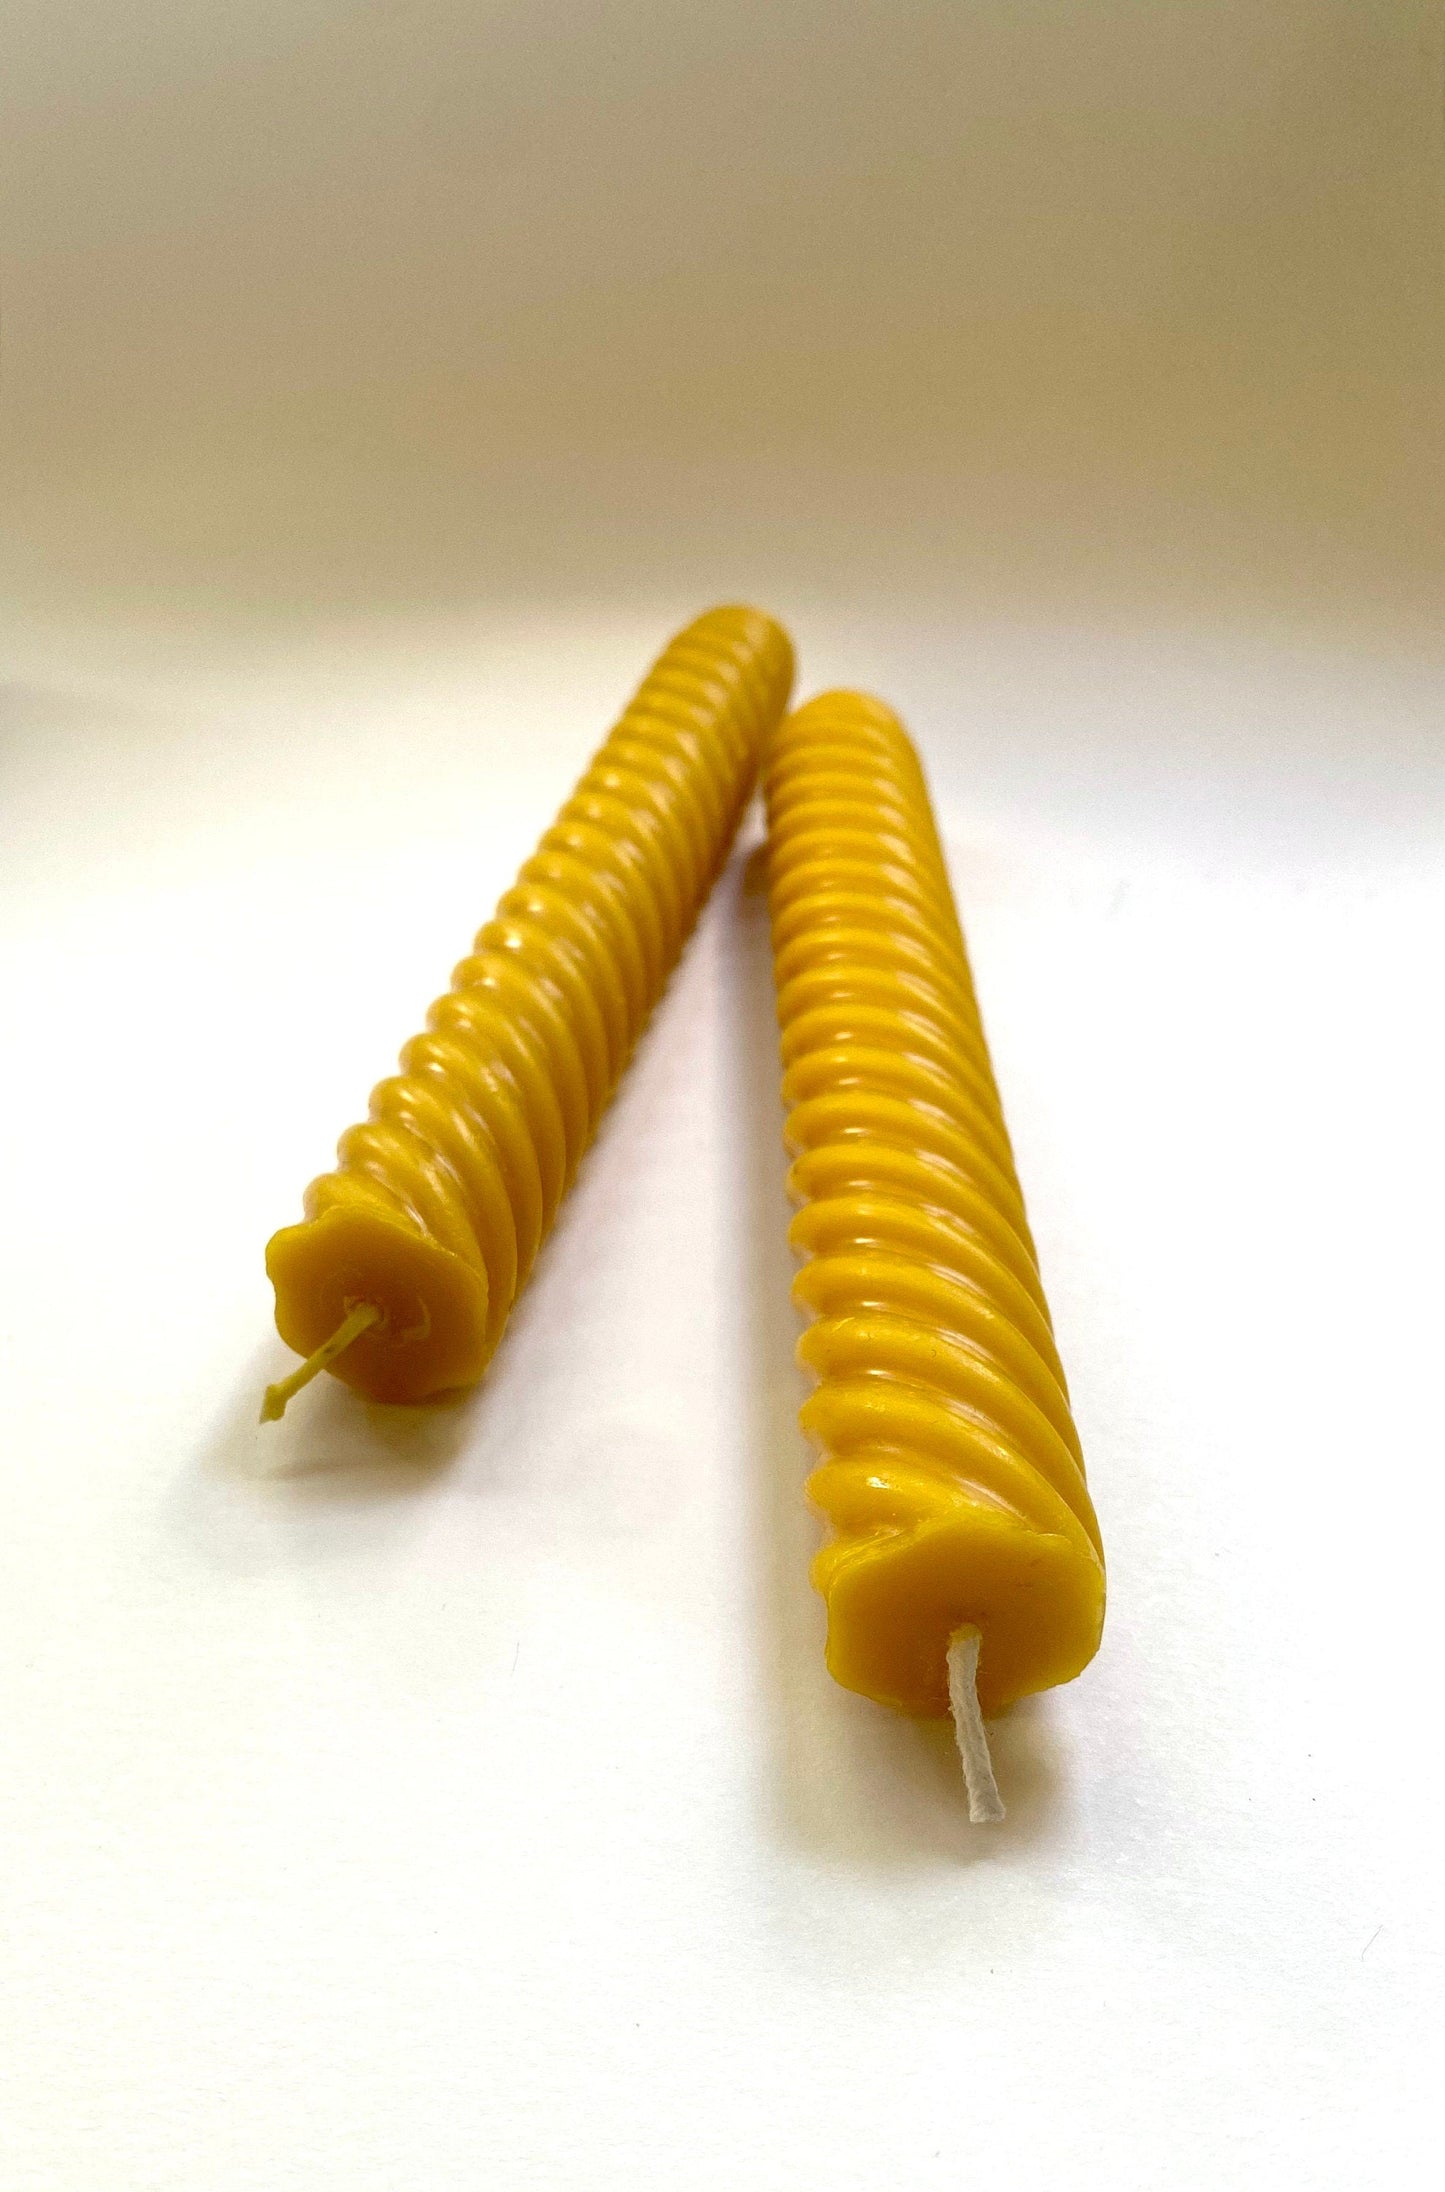 White Beeswax Spiral Tapers - Pair of Two 8" - Beeswax Tapers - Candles - Beeswax Candles, Twisted Taper Candles